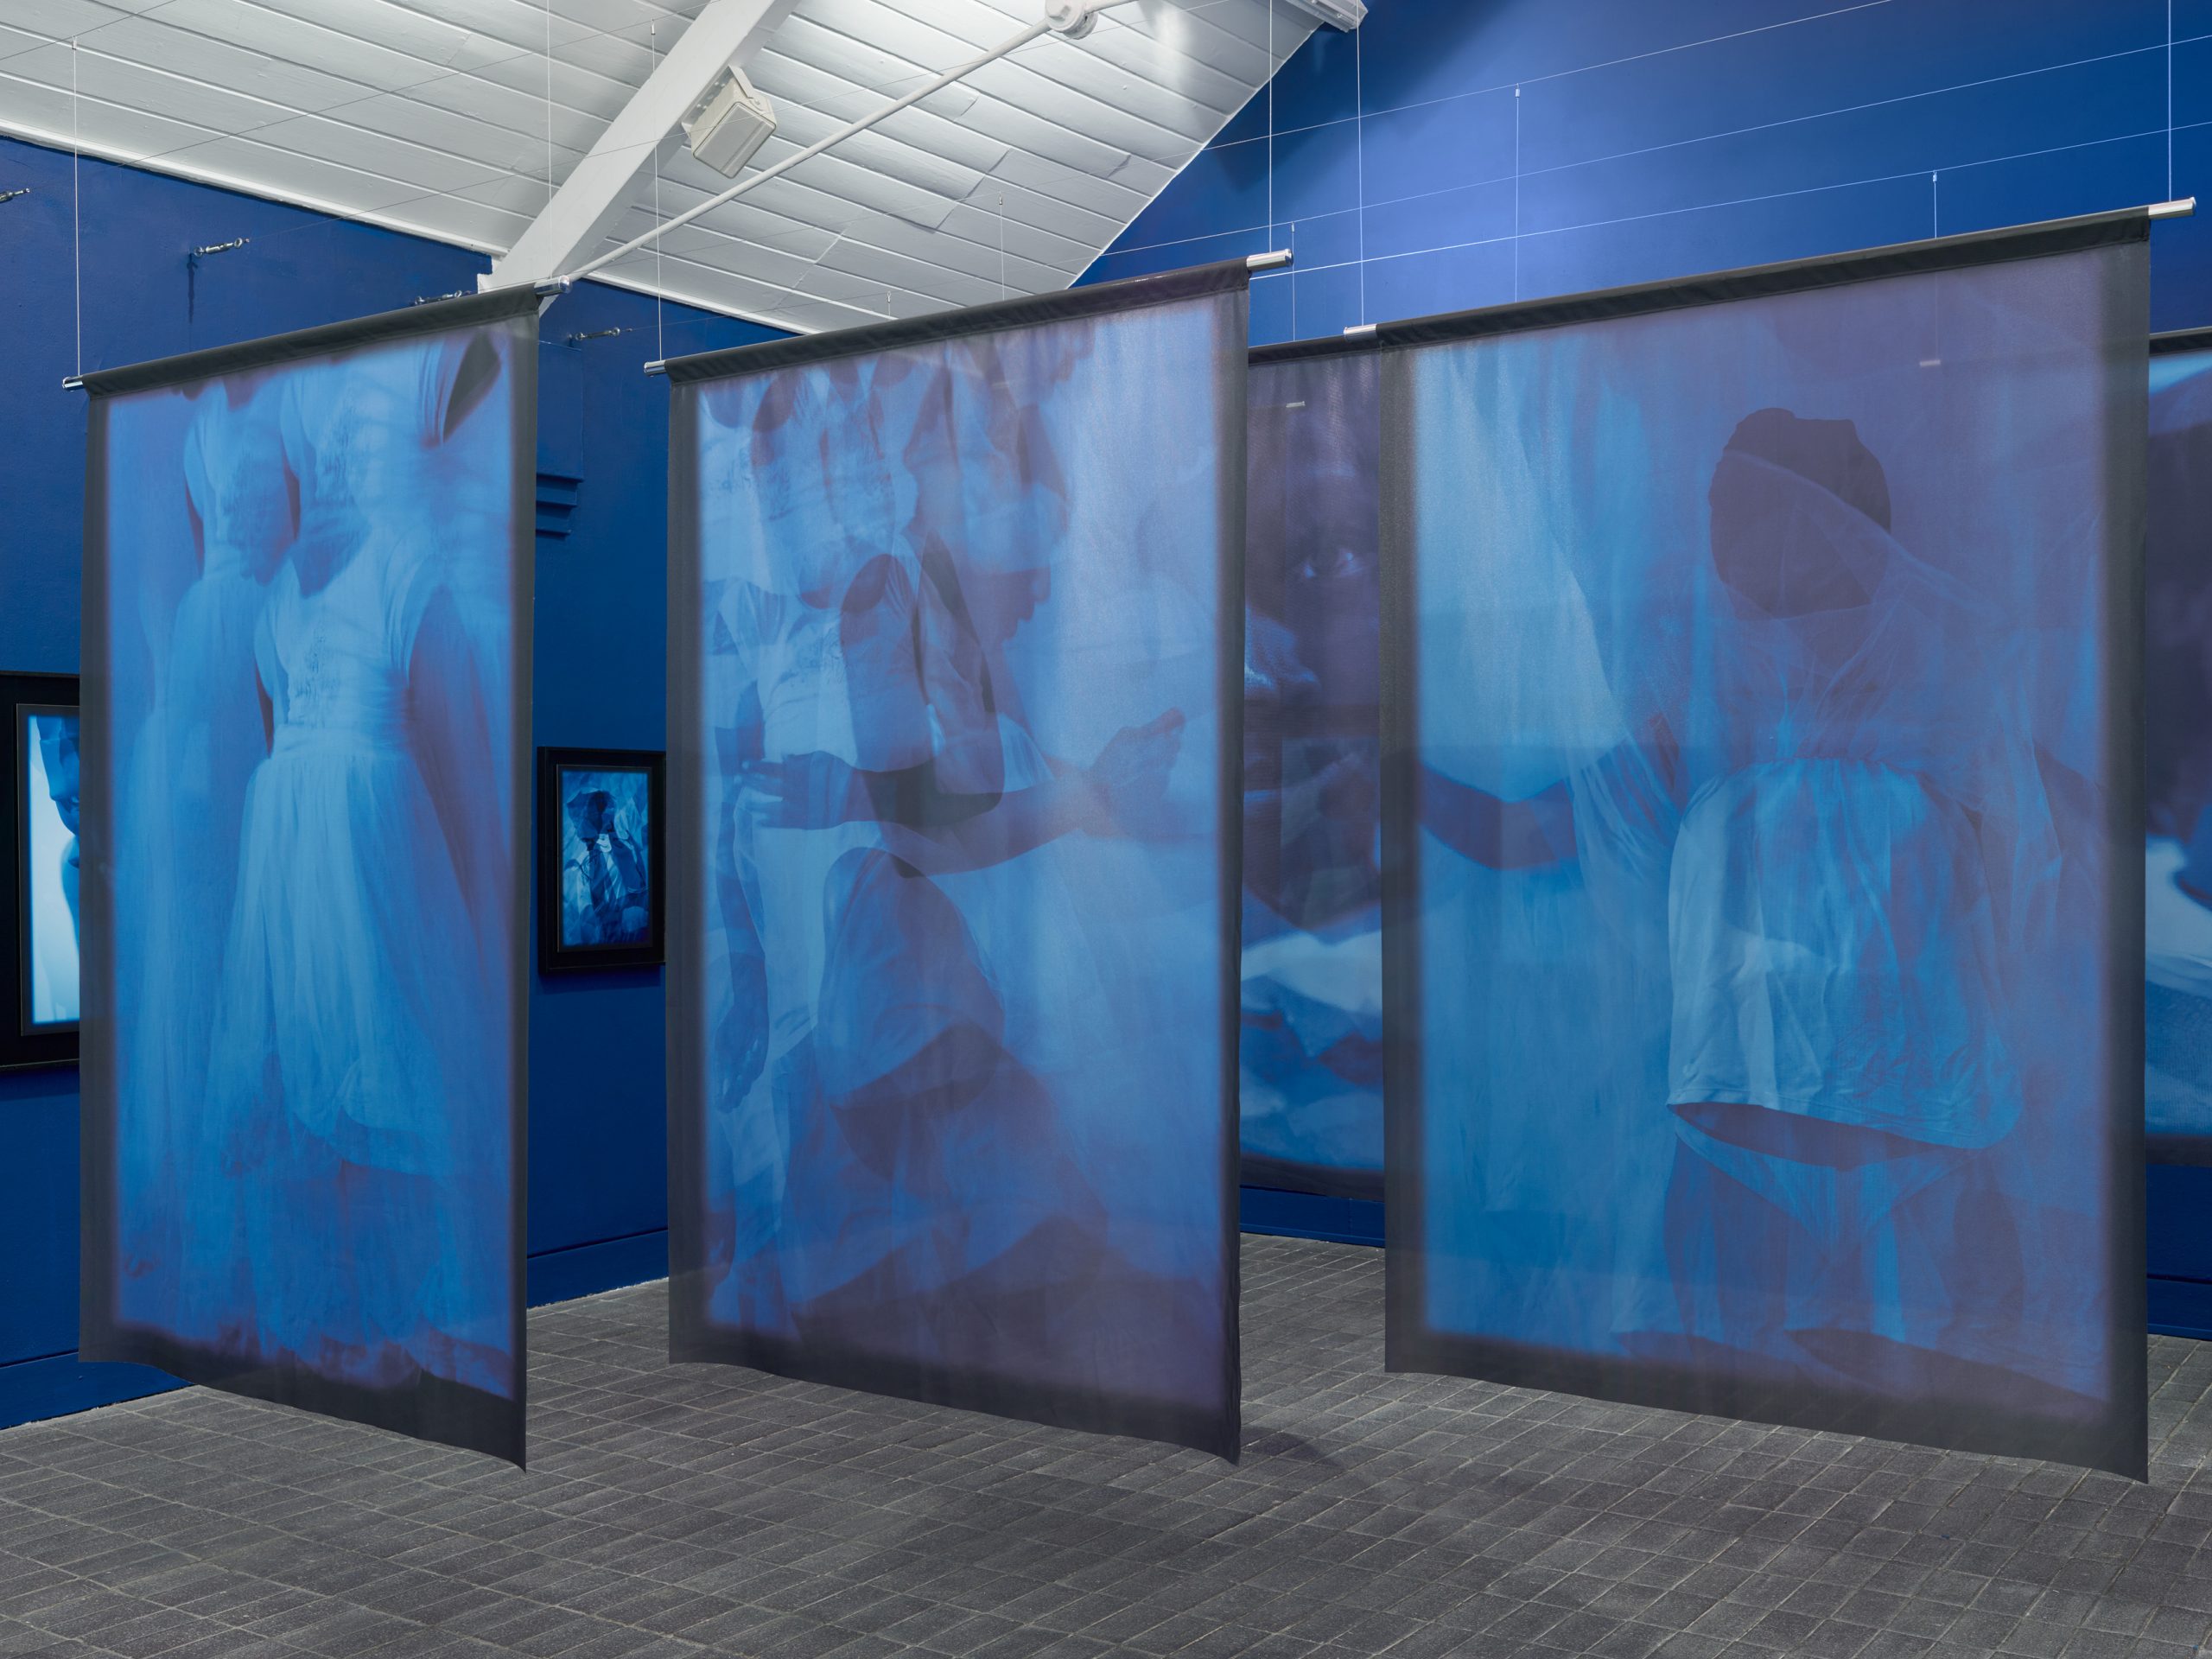 Heather Agyepong, ego death, 2022. Originally commissioned through the Jerwood/Photoworks Awards, supported by Jerwood Arts and Photoworks. Installation view at Jerwood Space. Photo: Anna Arca